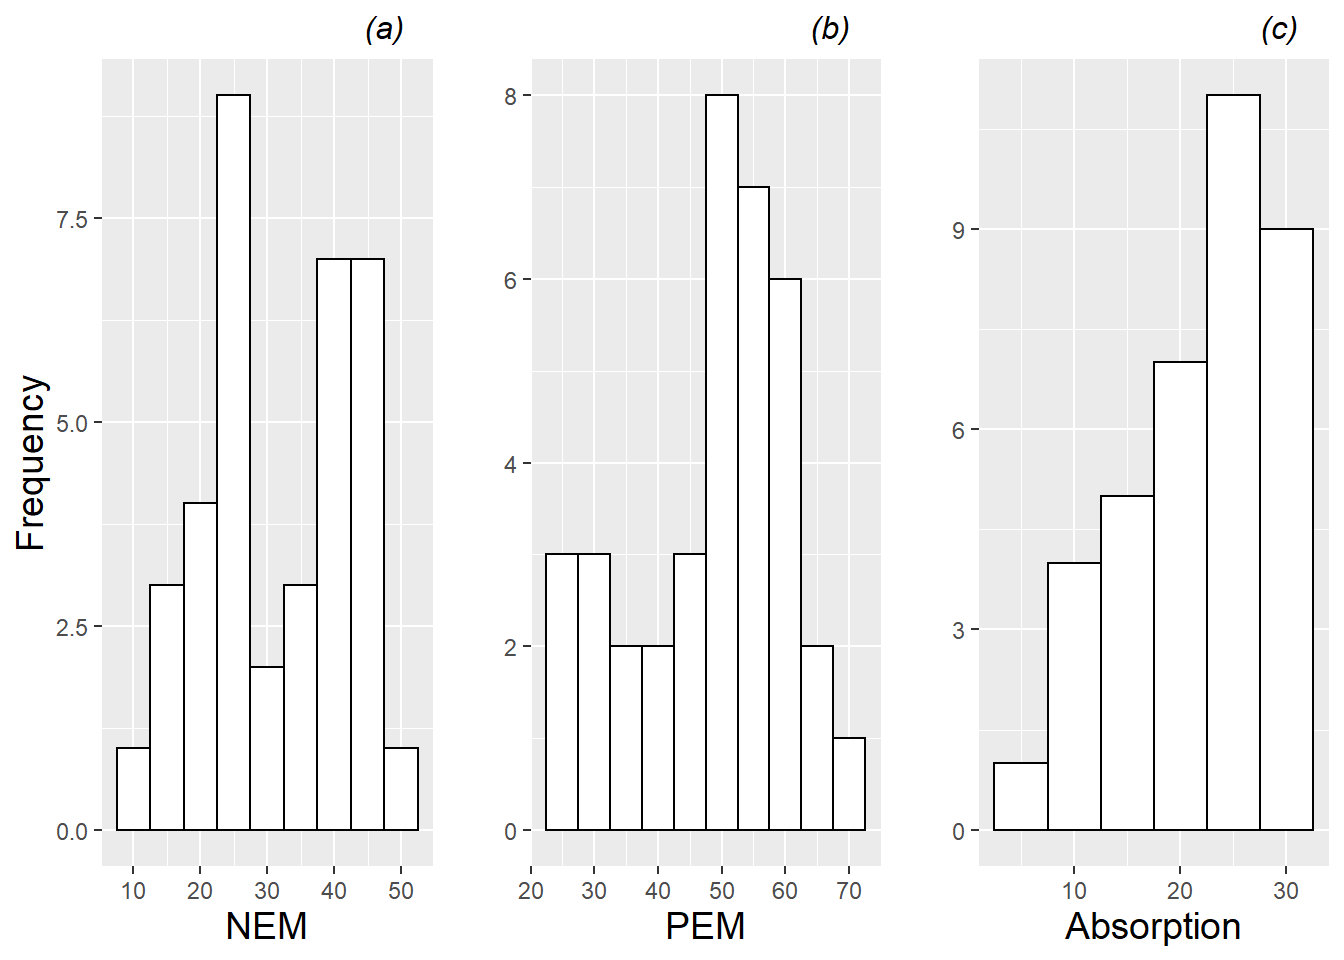 Histograms of the 3 continuous Level Two covariates (negative emotionality (NEM), positive emotionality (PEM), and absorption).  Each plot contains one observation per musician.